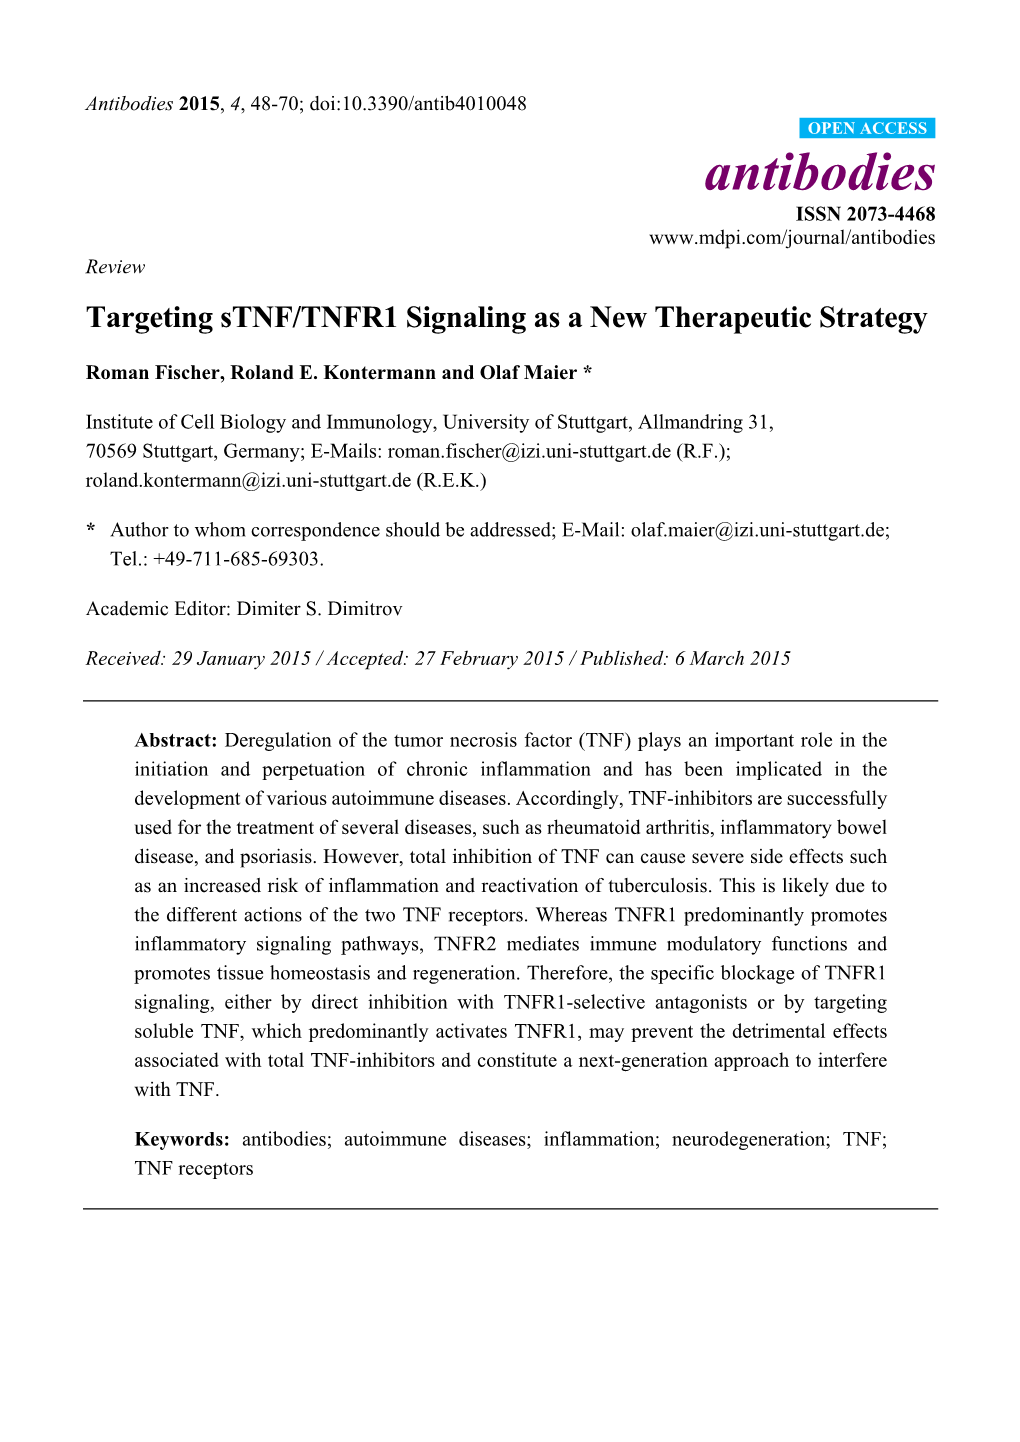 Targeting Stnf/TNFR1 Signaling As a New Therapeutic Strategy